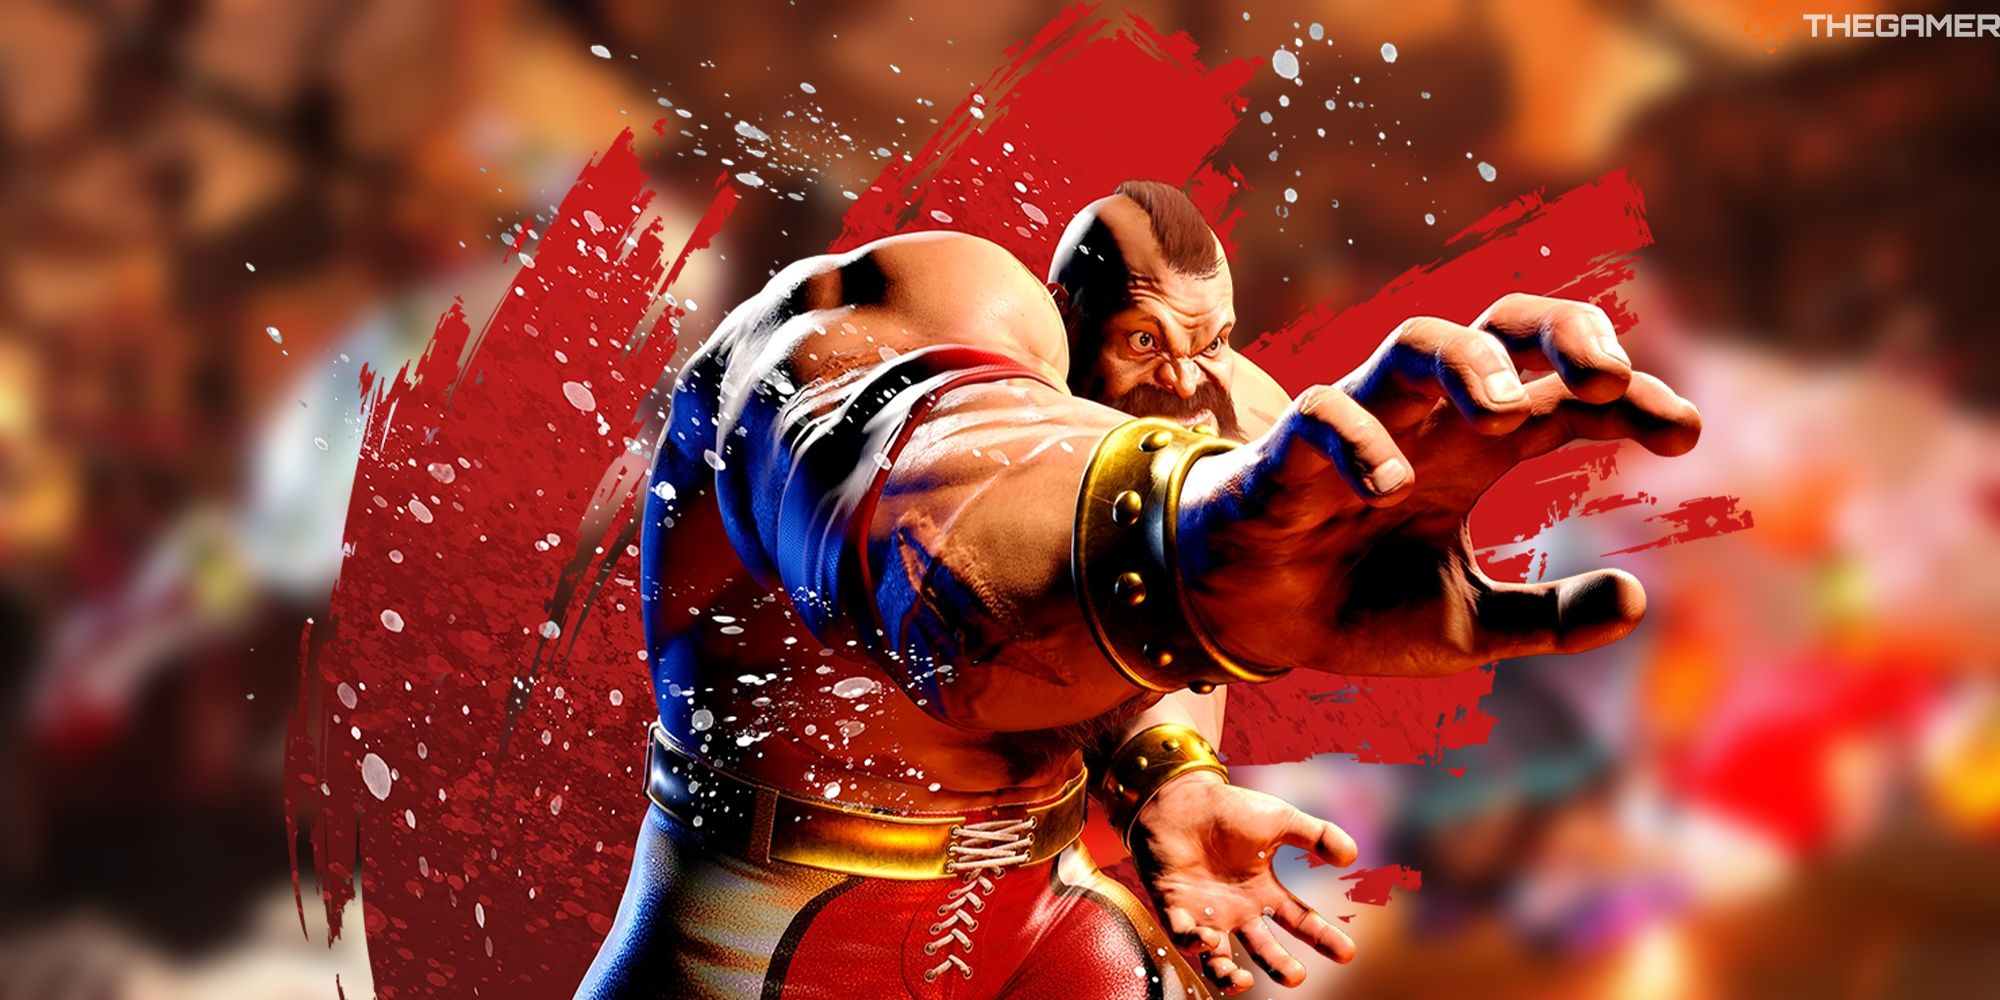 Check out Zangief's new entrance theme for Street Fighter 6 – Destructoid